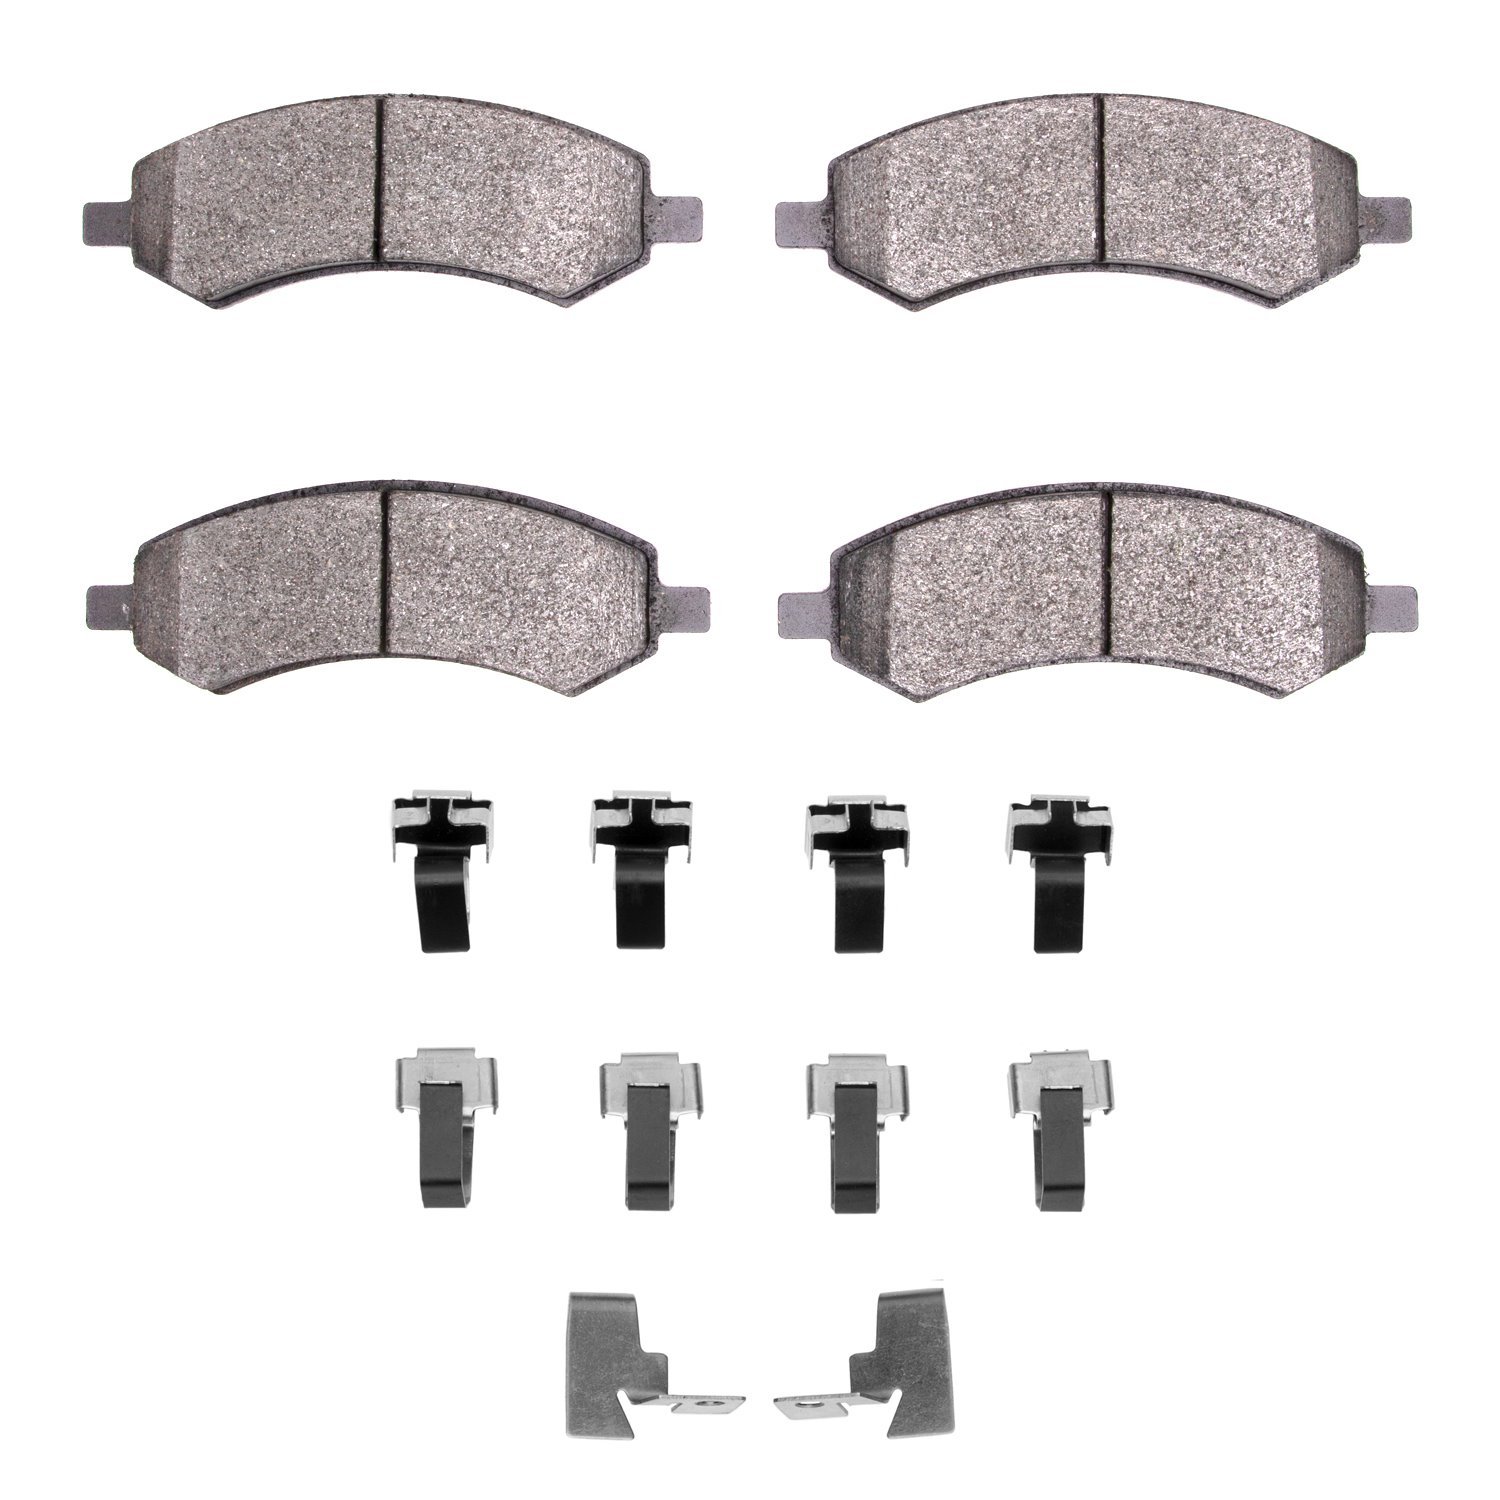 Performance Off-Road/Tow Brake Pads & Hardware Kit, Fits Select Fits Multiple Makes/Models, Position: Front